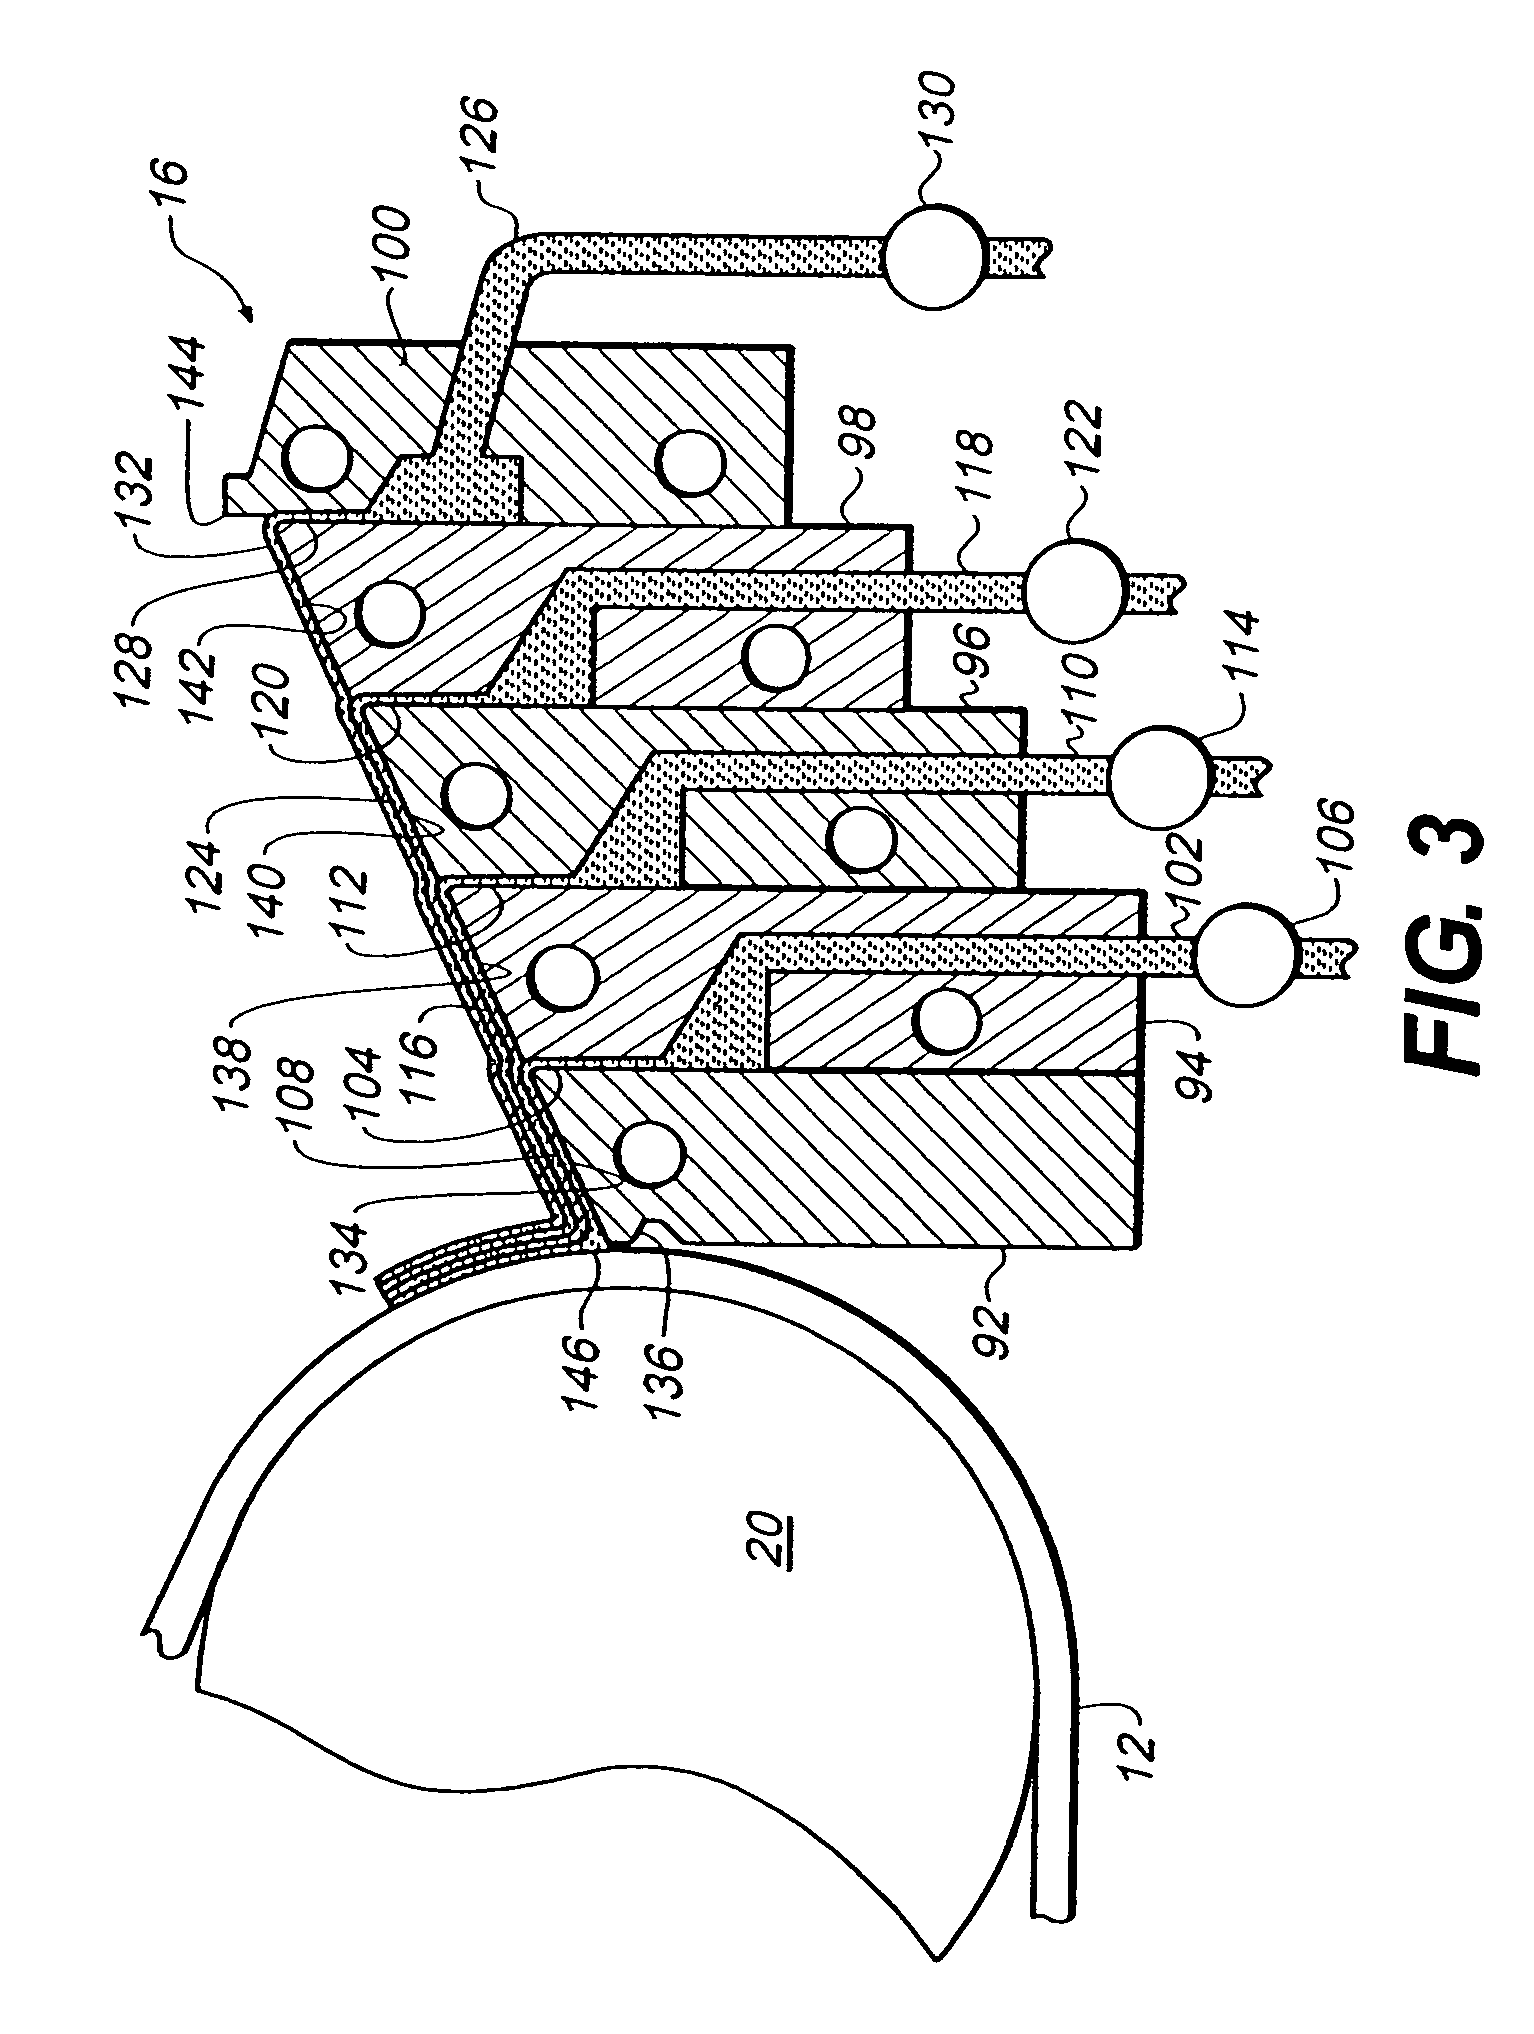 Polarizing plate laminated with an improved glue composition and a method of manufacturing the same